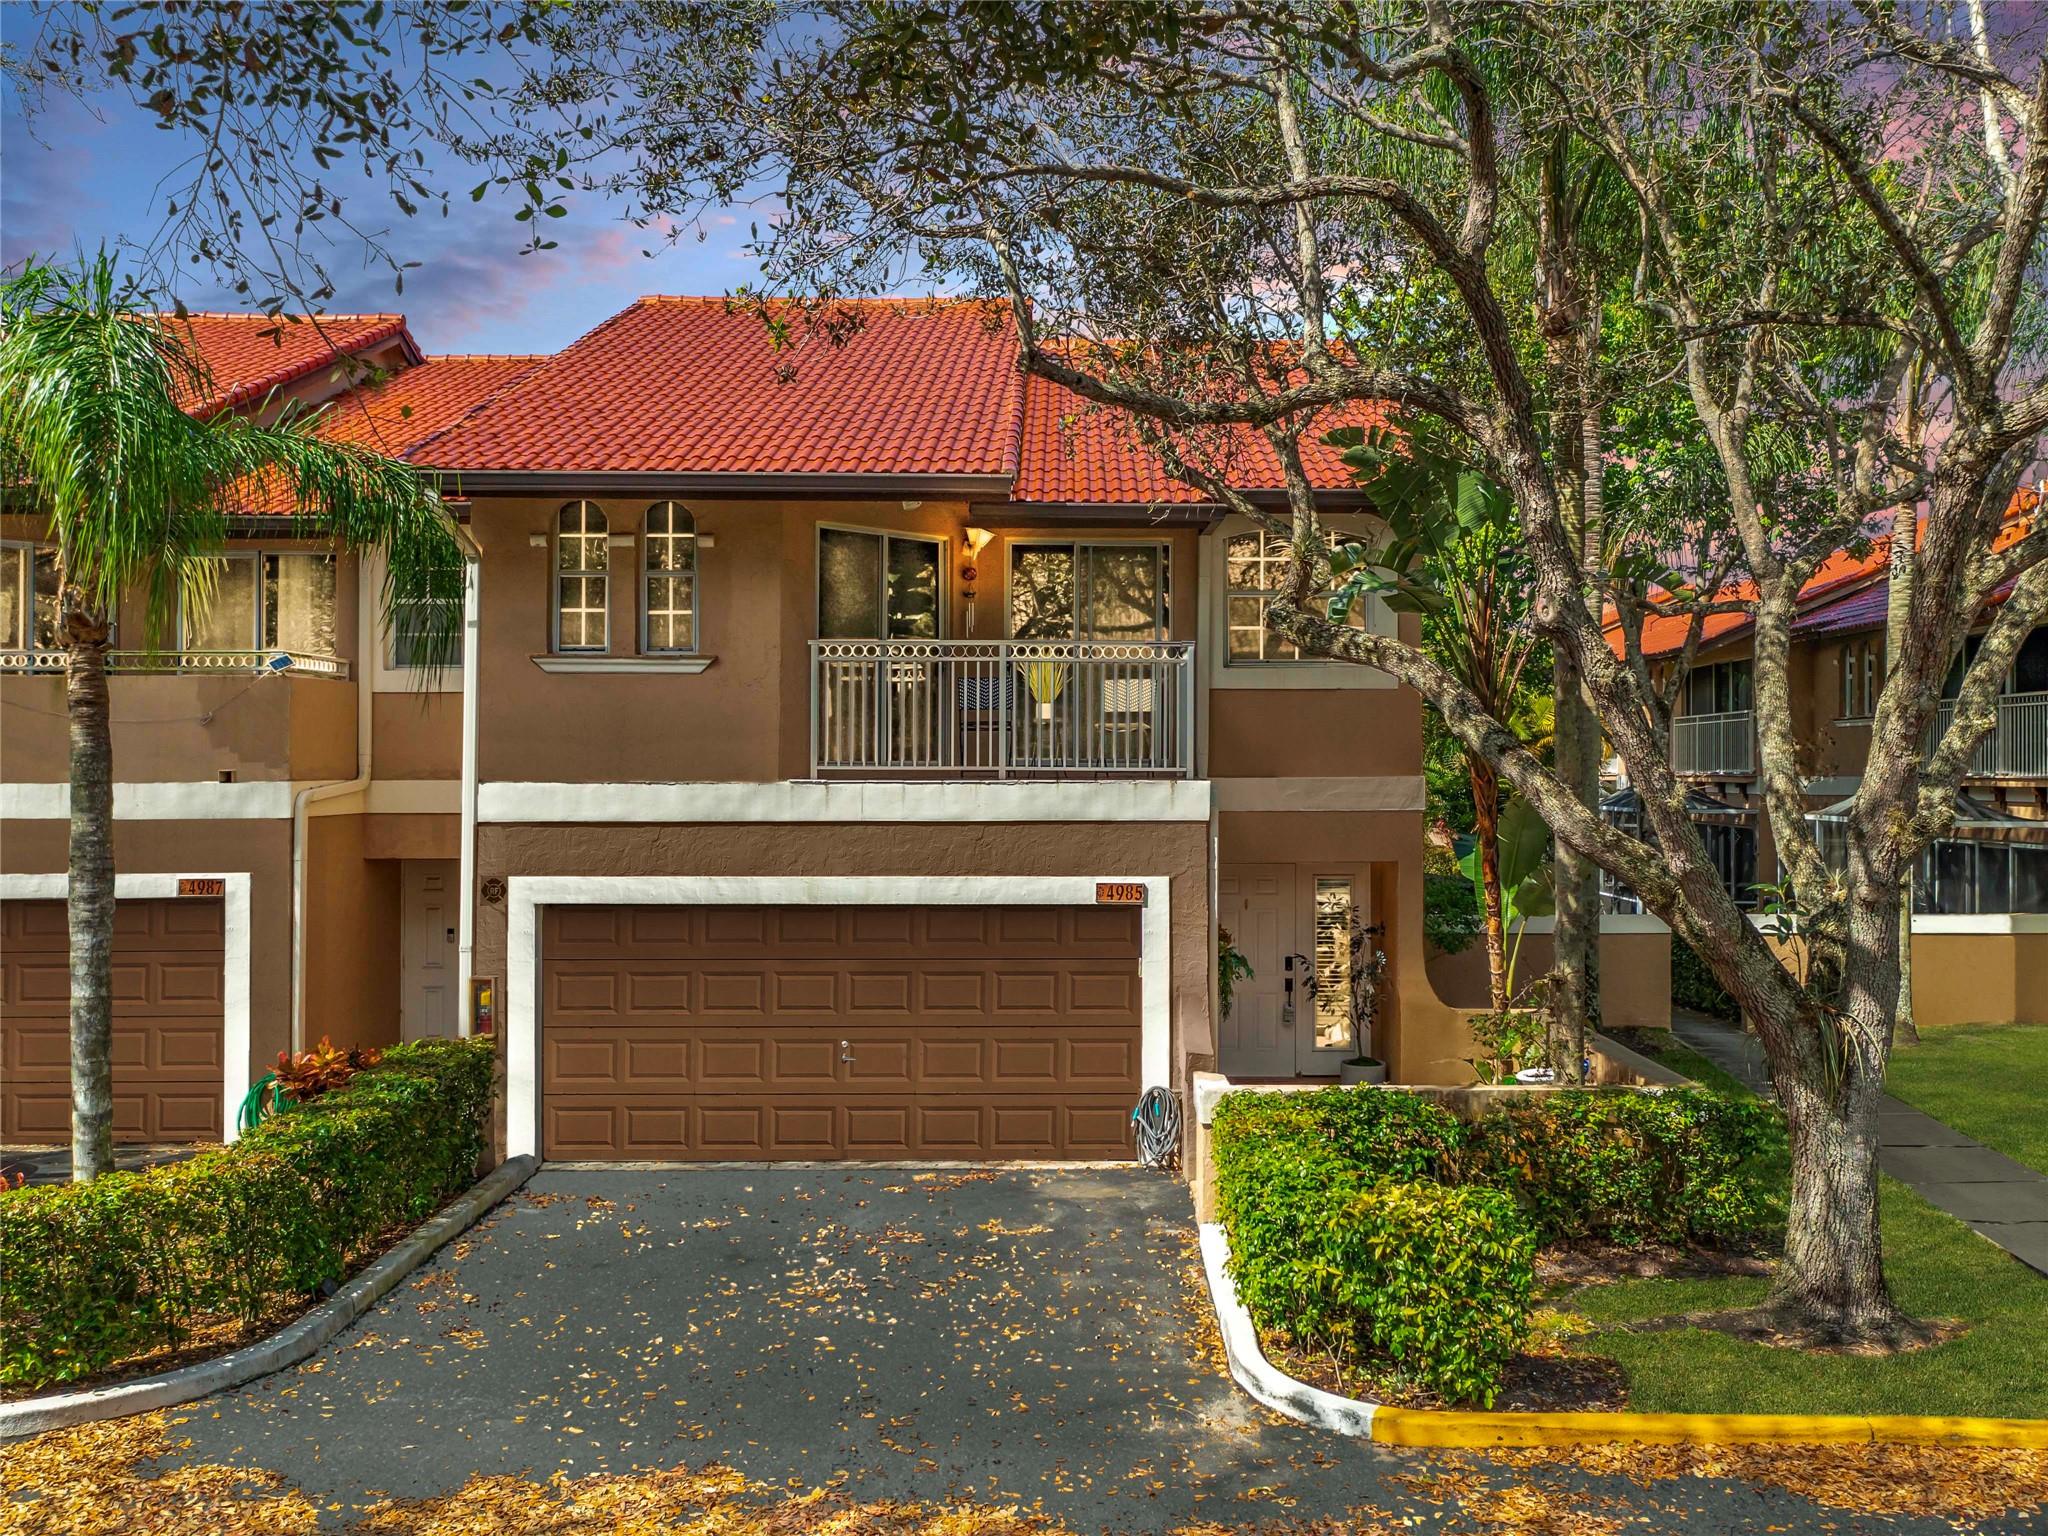 View Coral Springs, FL 33067 townhome